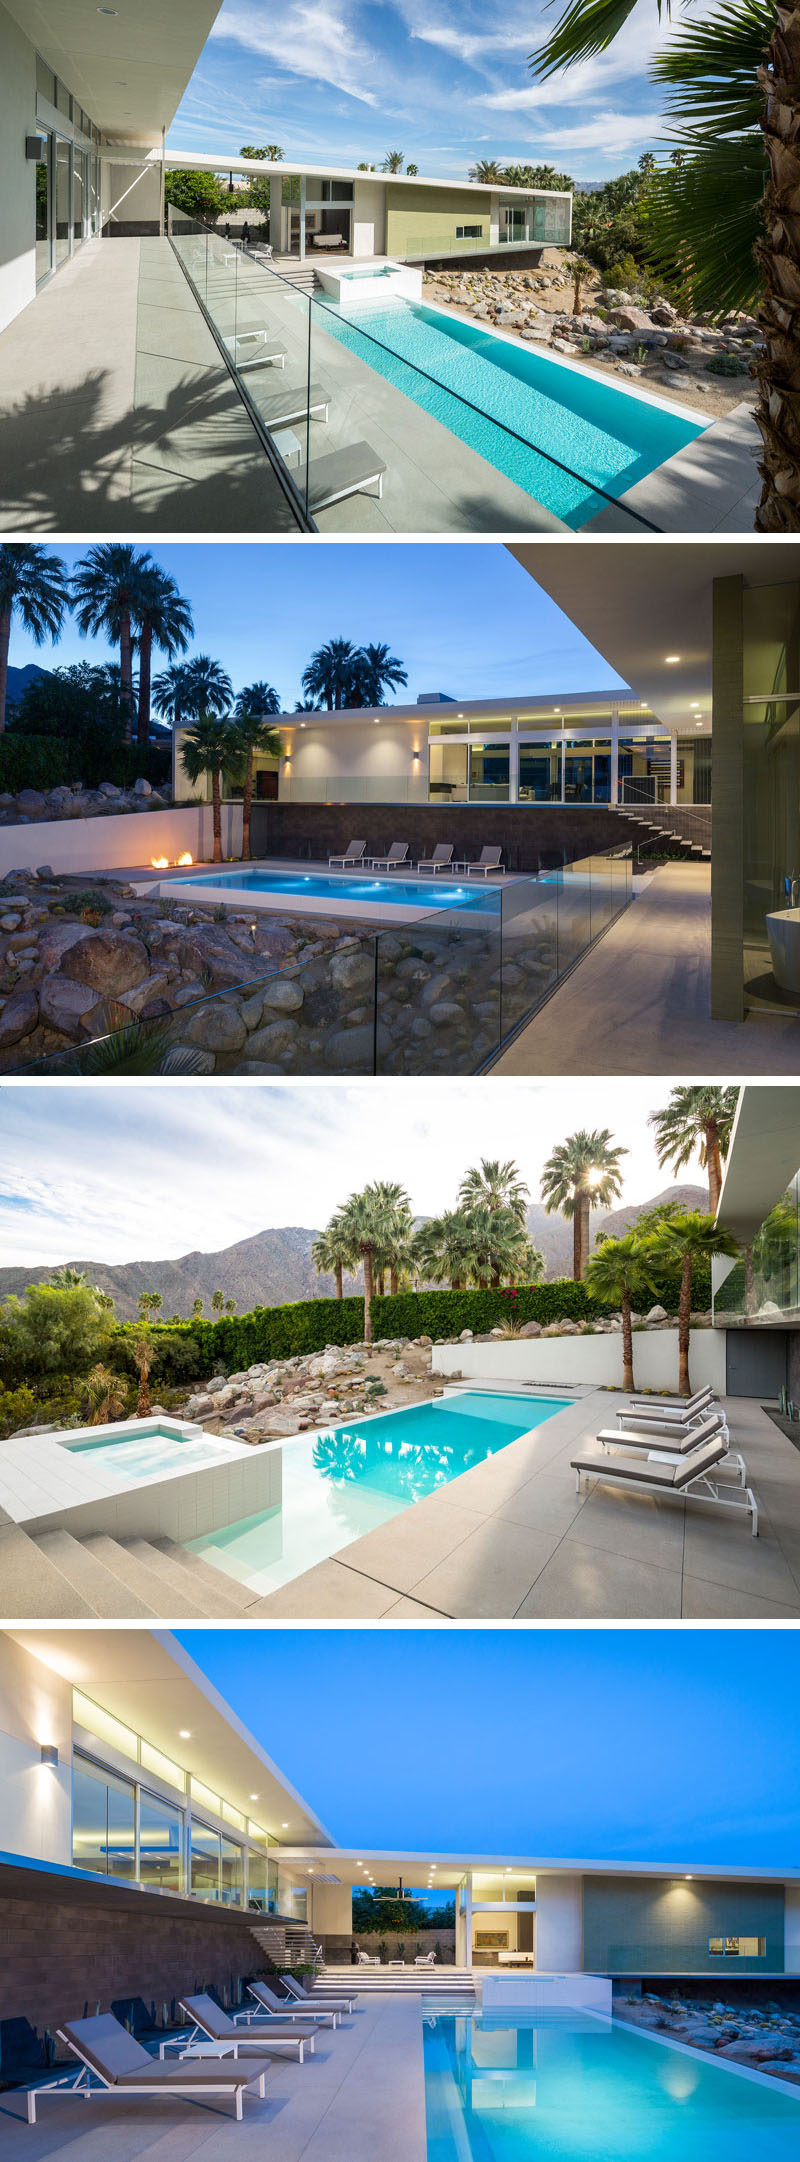 This pool and spa are surrounded by a concrete deck and rock garden.